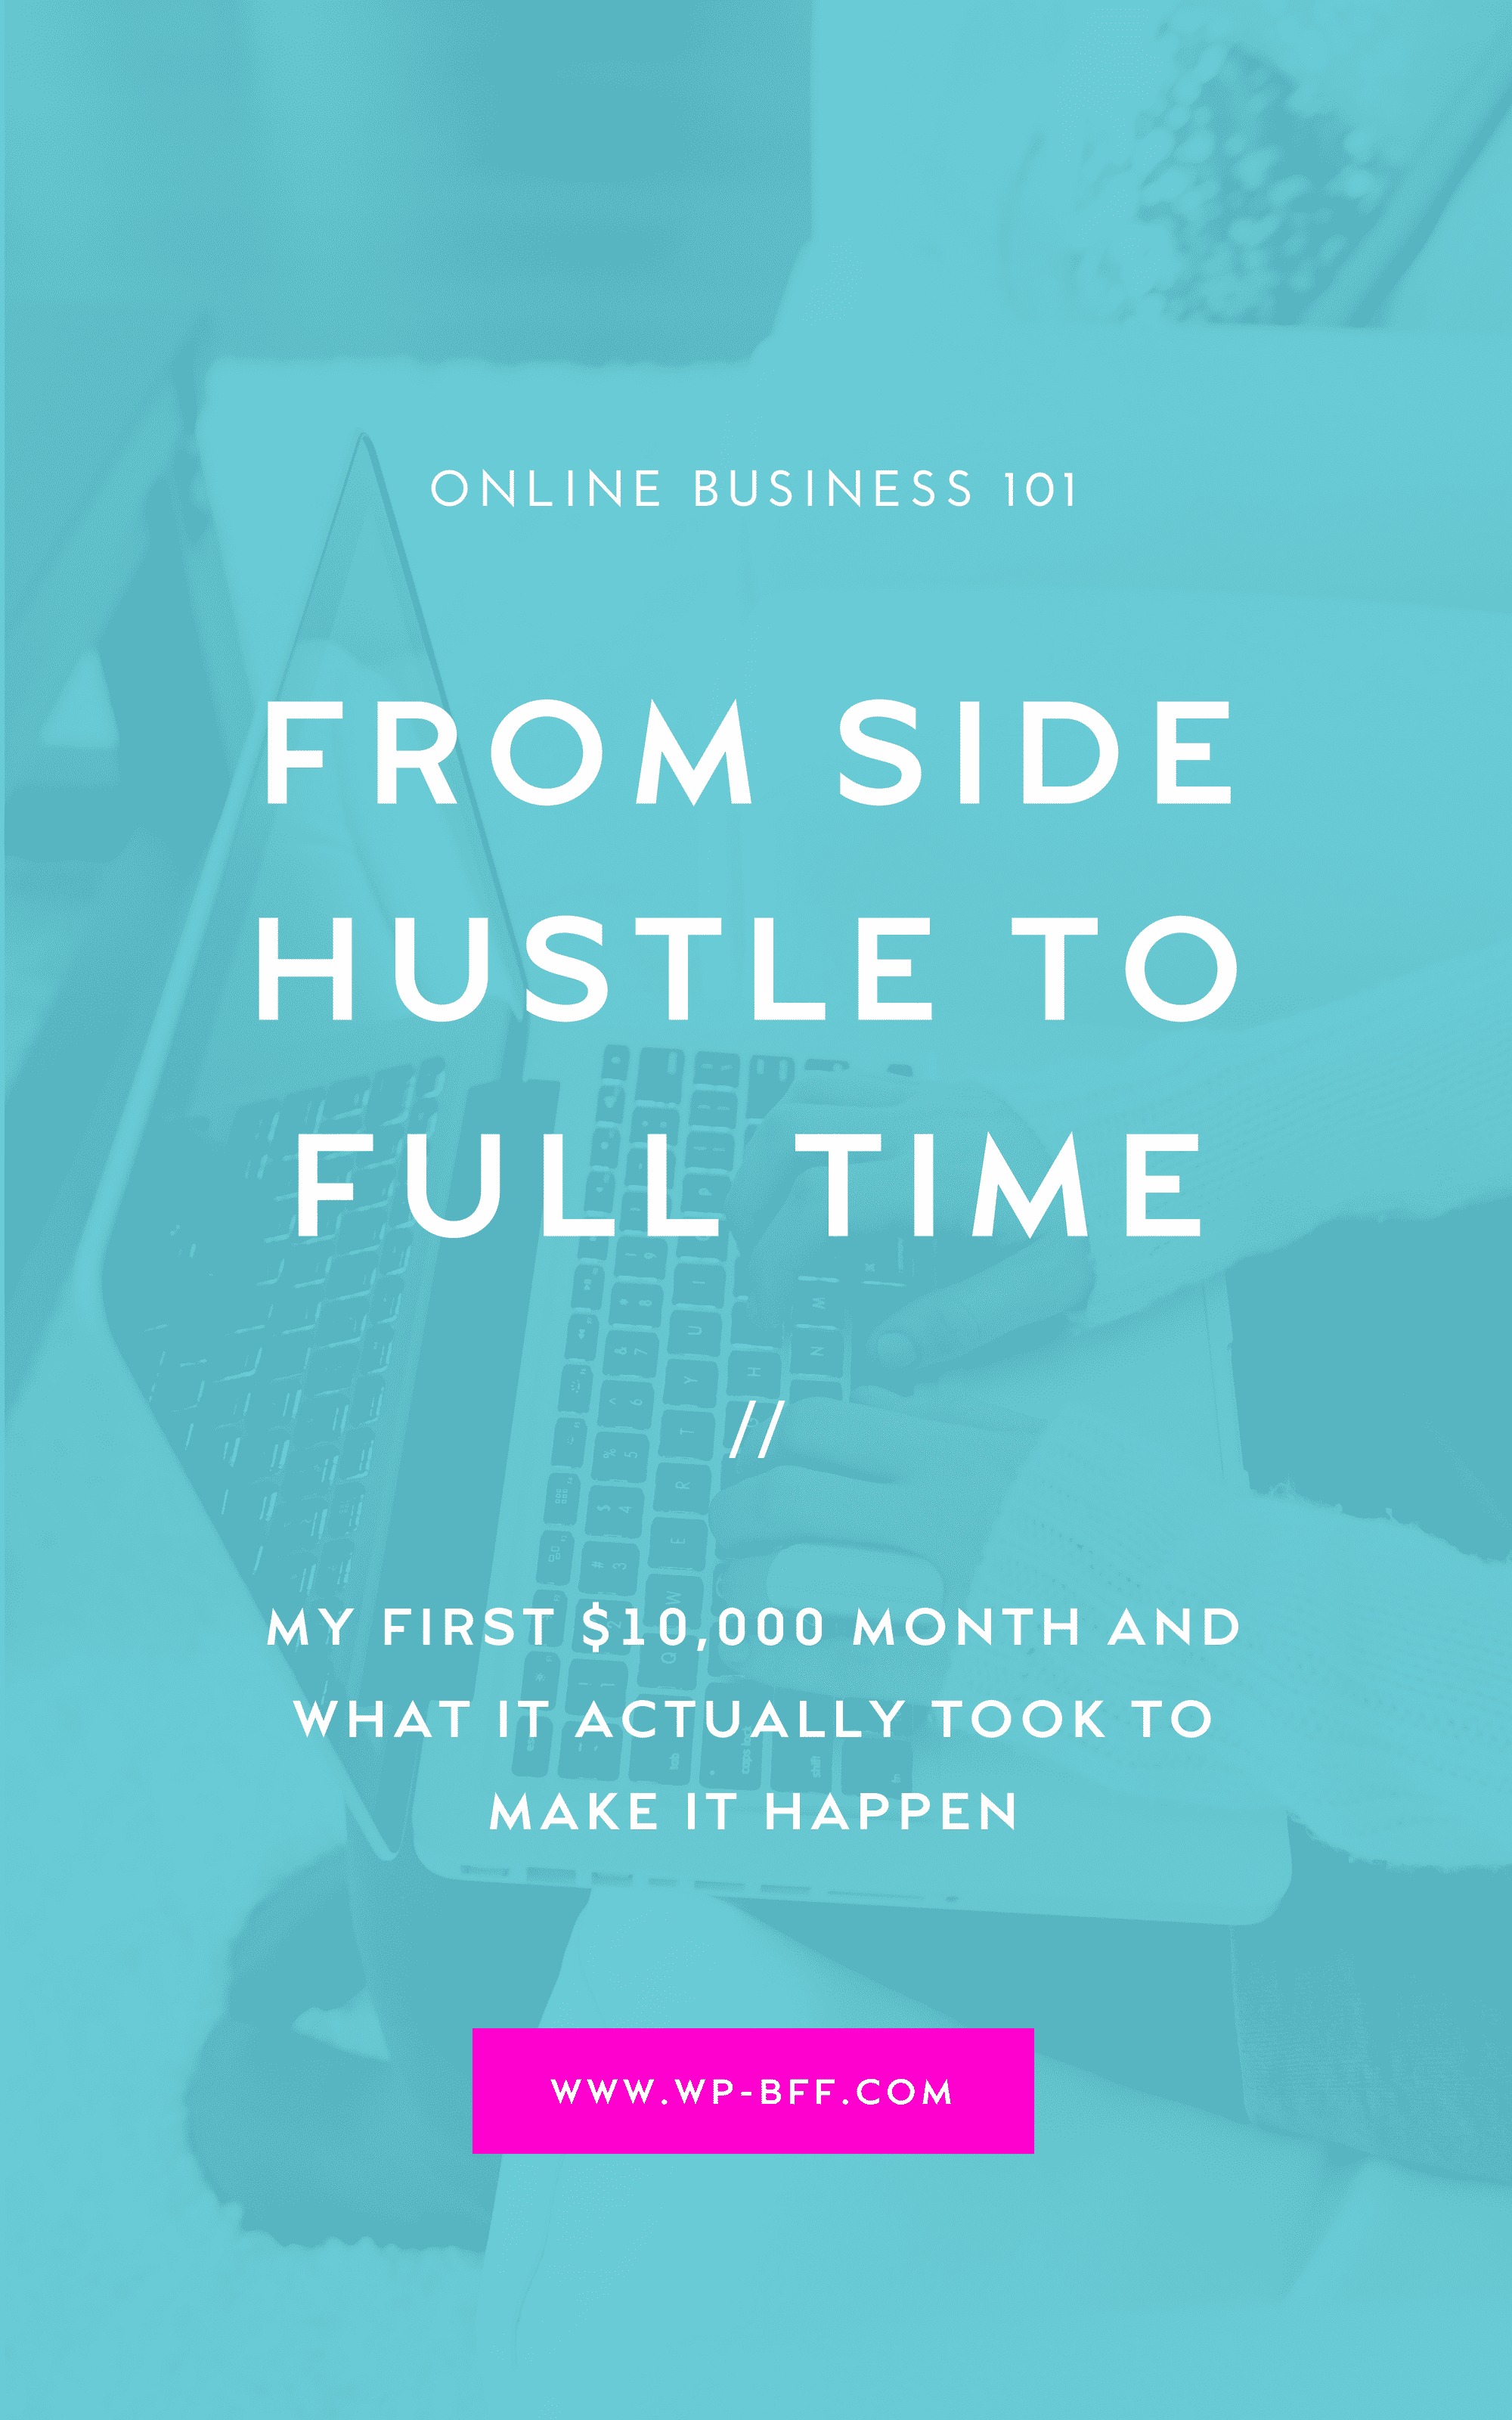 How I Made $10,000 in one month in my online business.